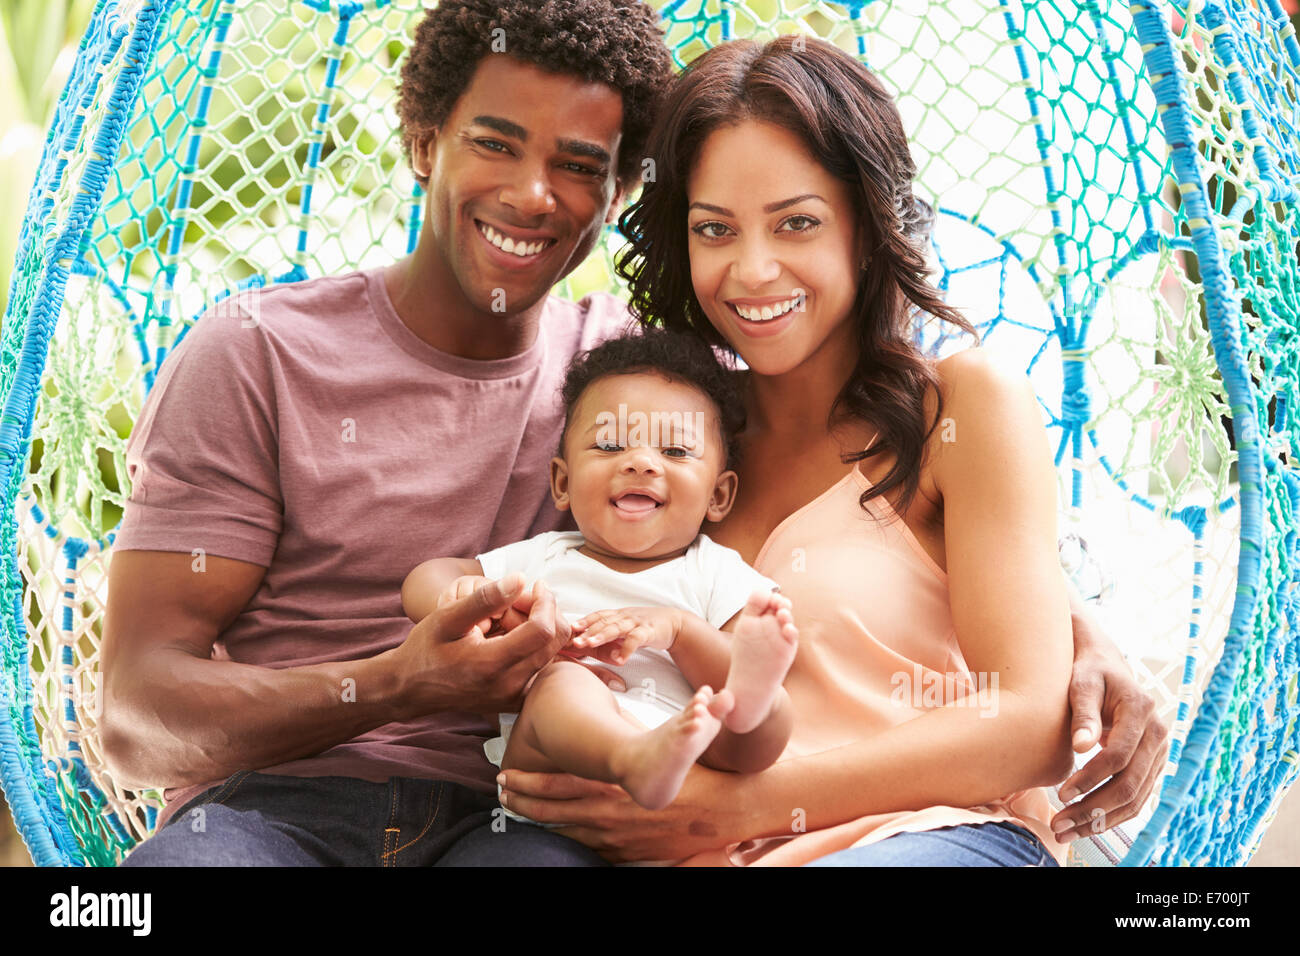 Family With Baby Relaxing On Outdoor Garden Swing Seat Stock Photo